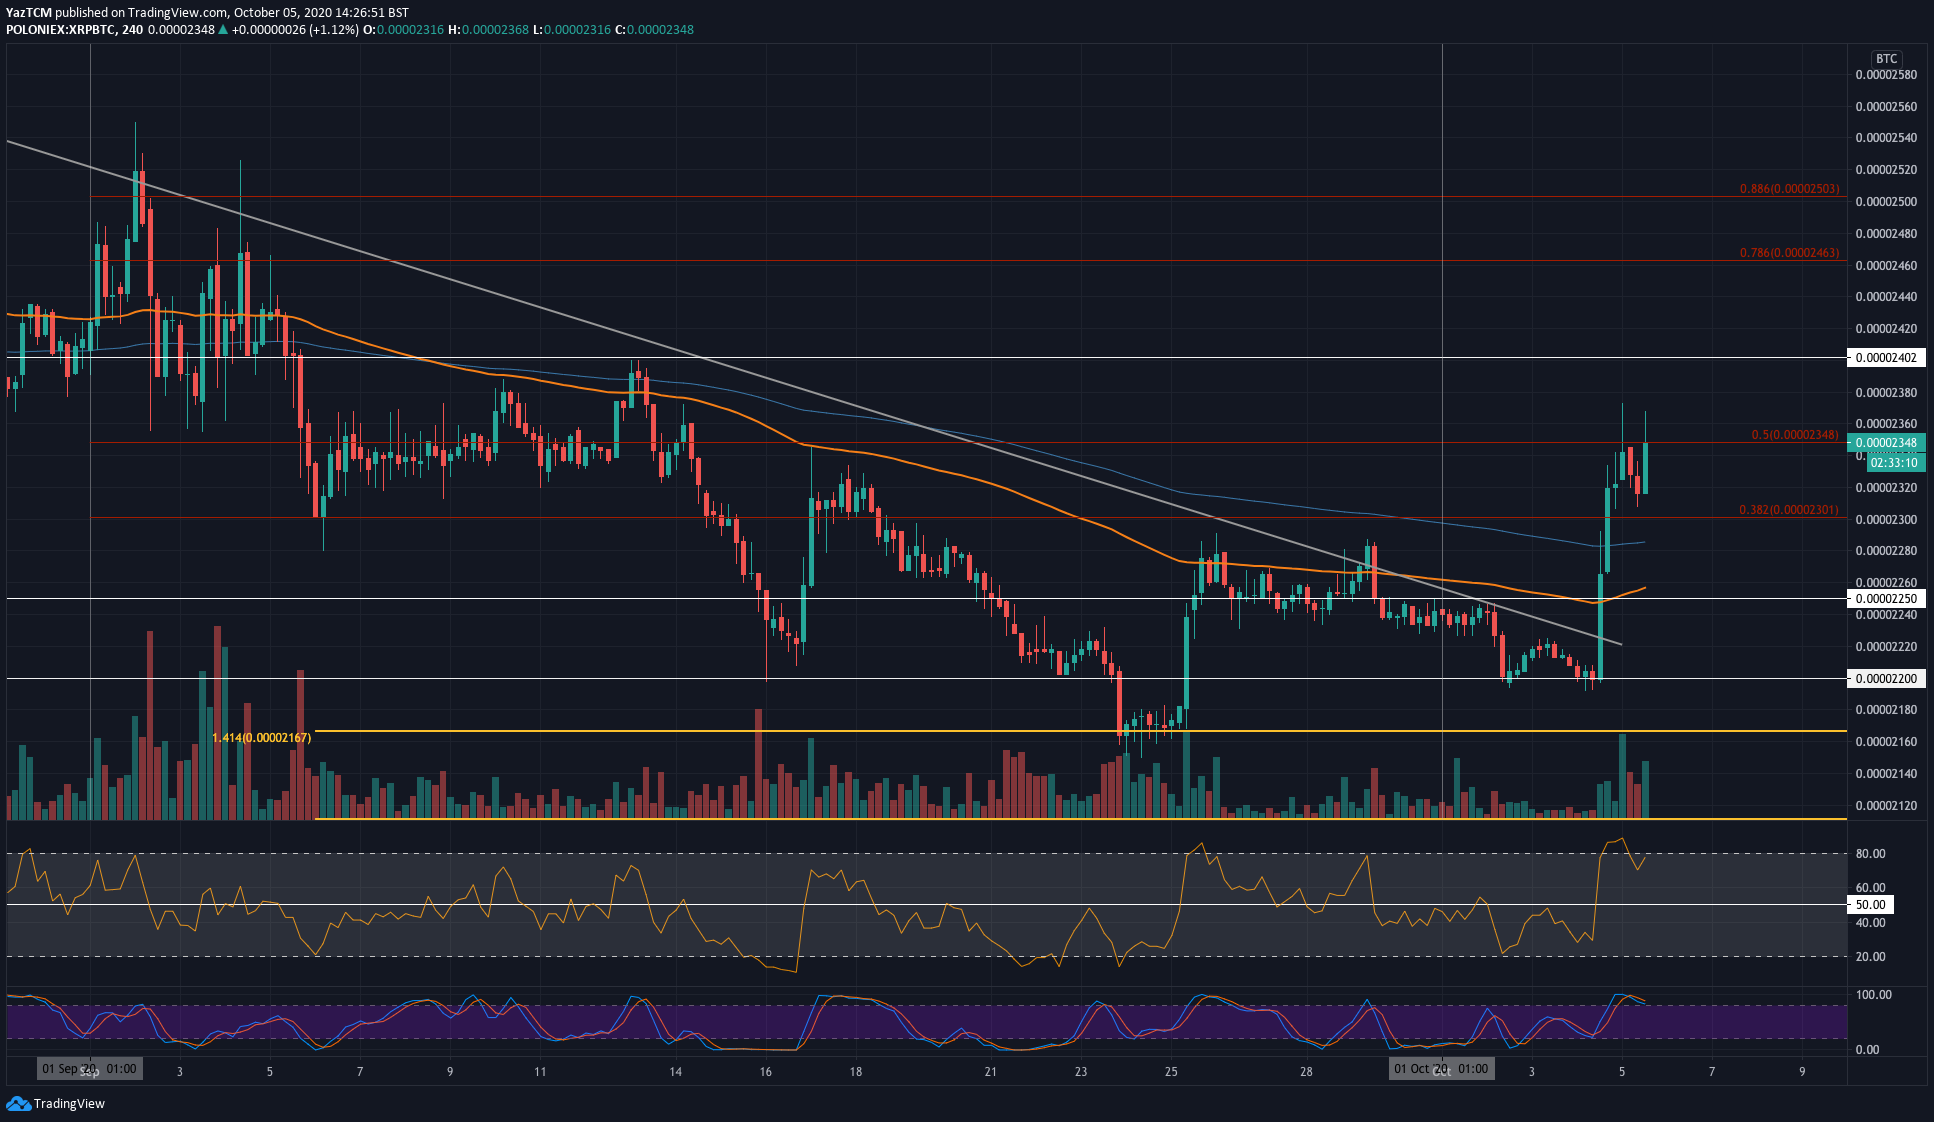 XRP Price Analysis: Ripple Soars 8% On The Daily, Is $0.30 Next?